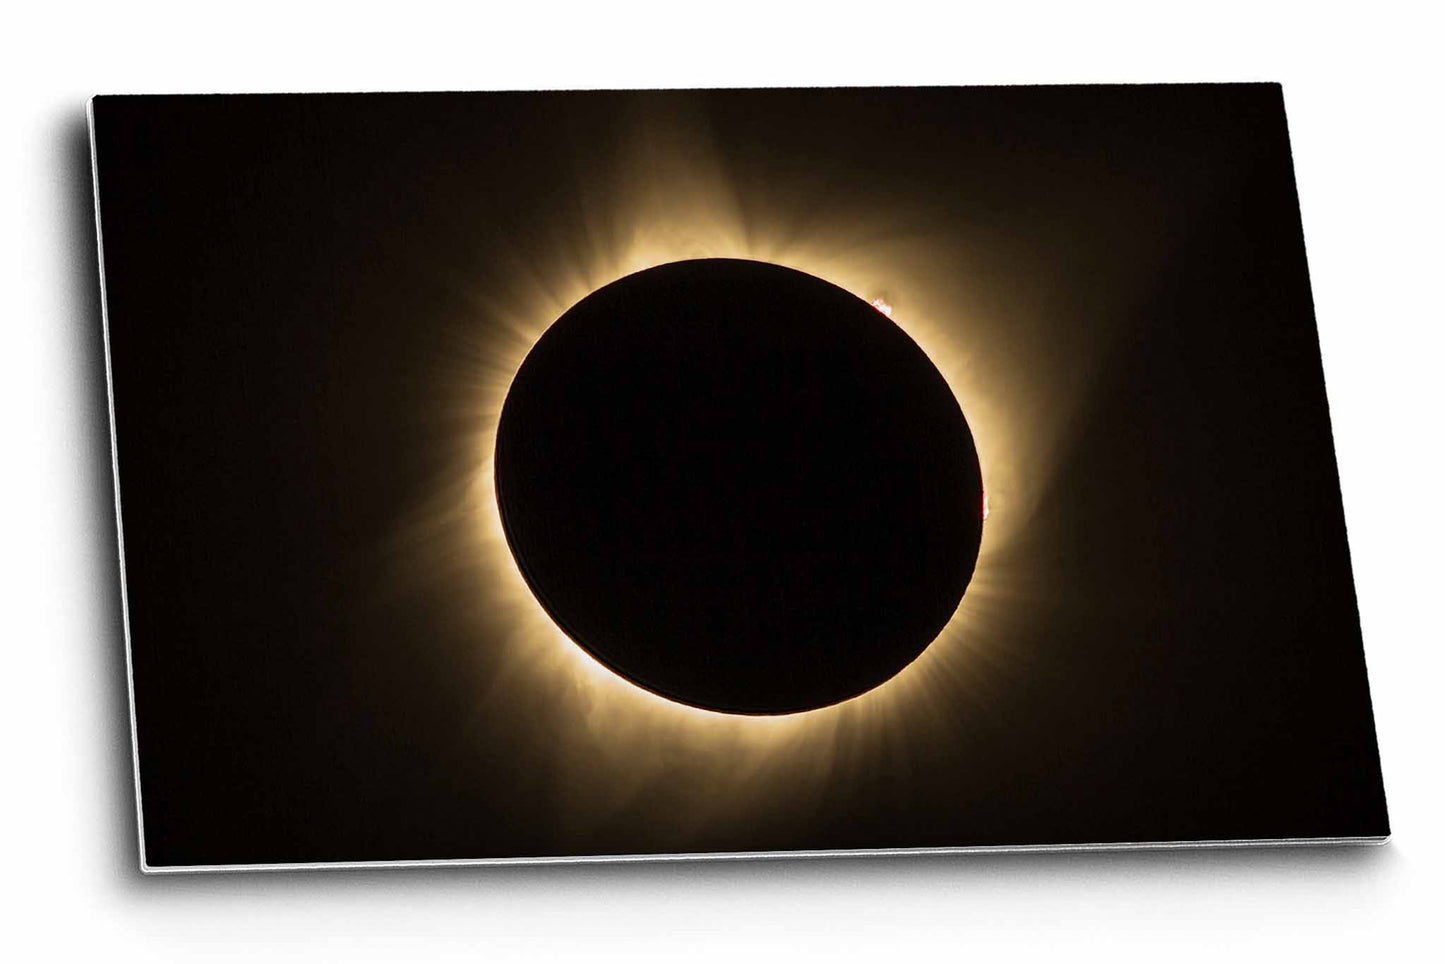 Celestial metal print on aluminum of a total solar eclipse with visible sun flares as captured in Nebraska by Sean Ramsey of Southern Plains Photography.